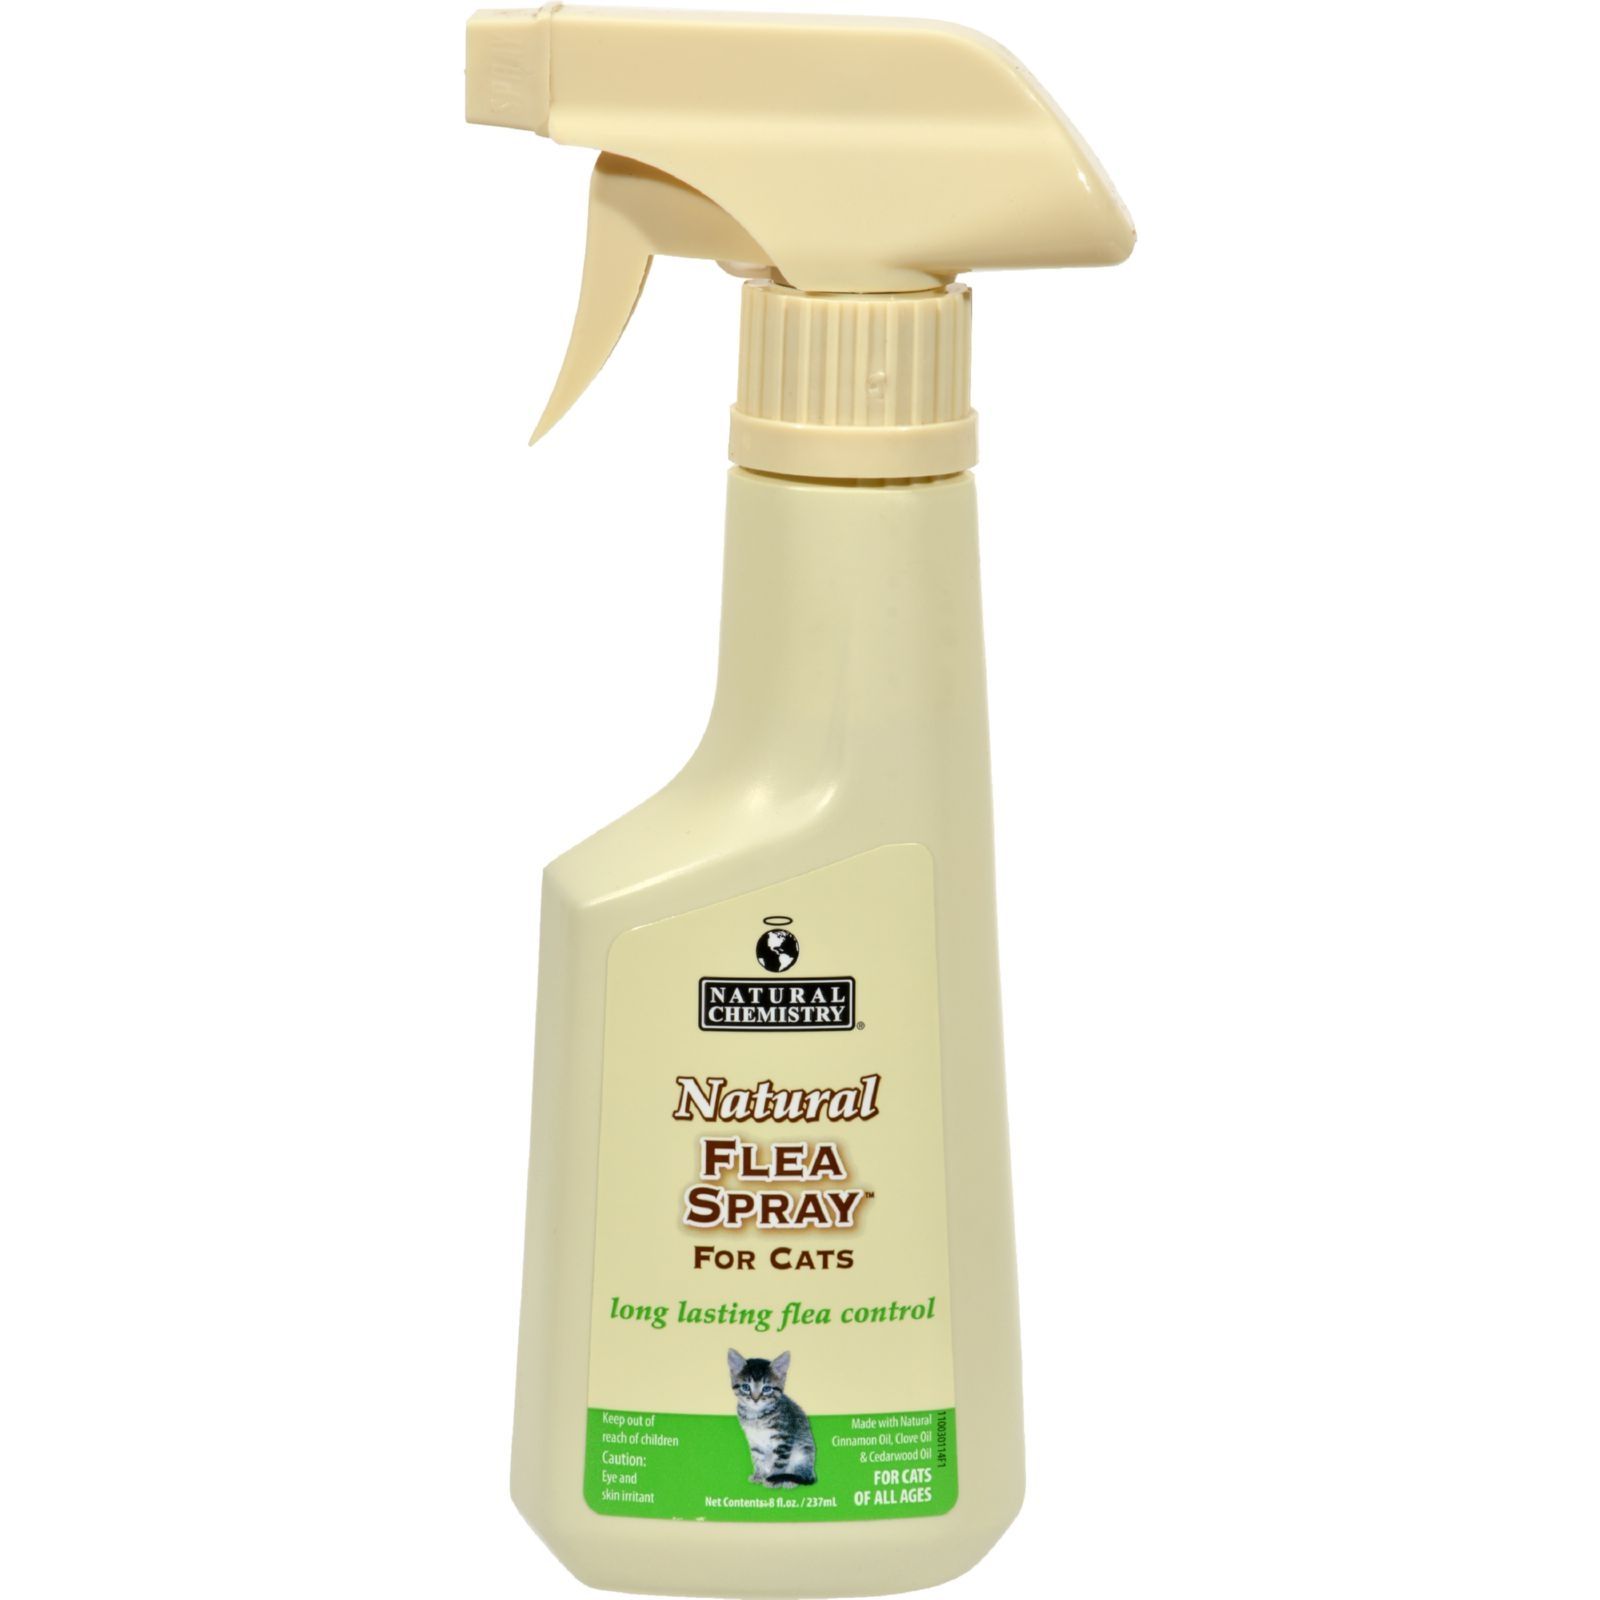 Natural Chemistry Natural Flea Spray For Cats - 8 Fl Oz